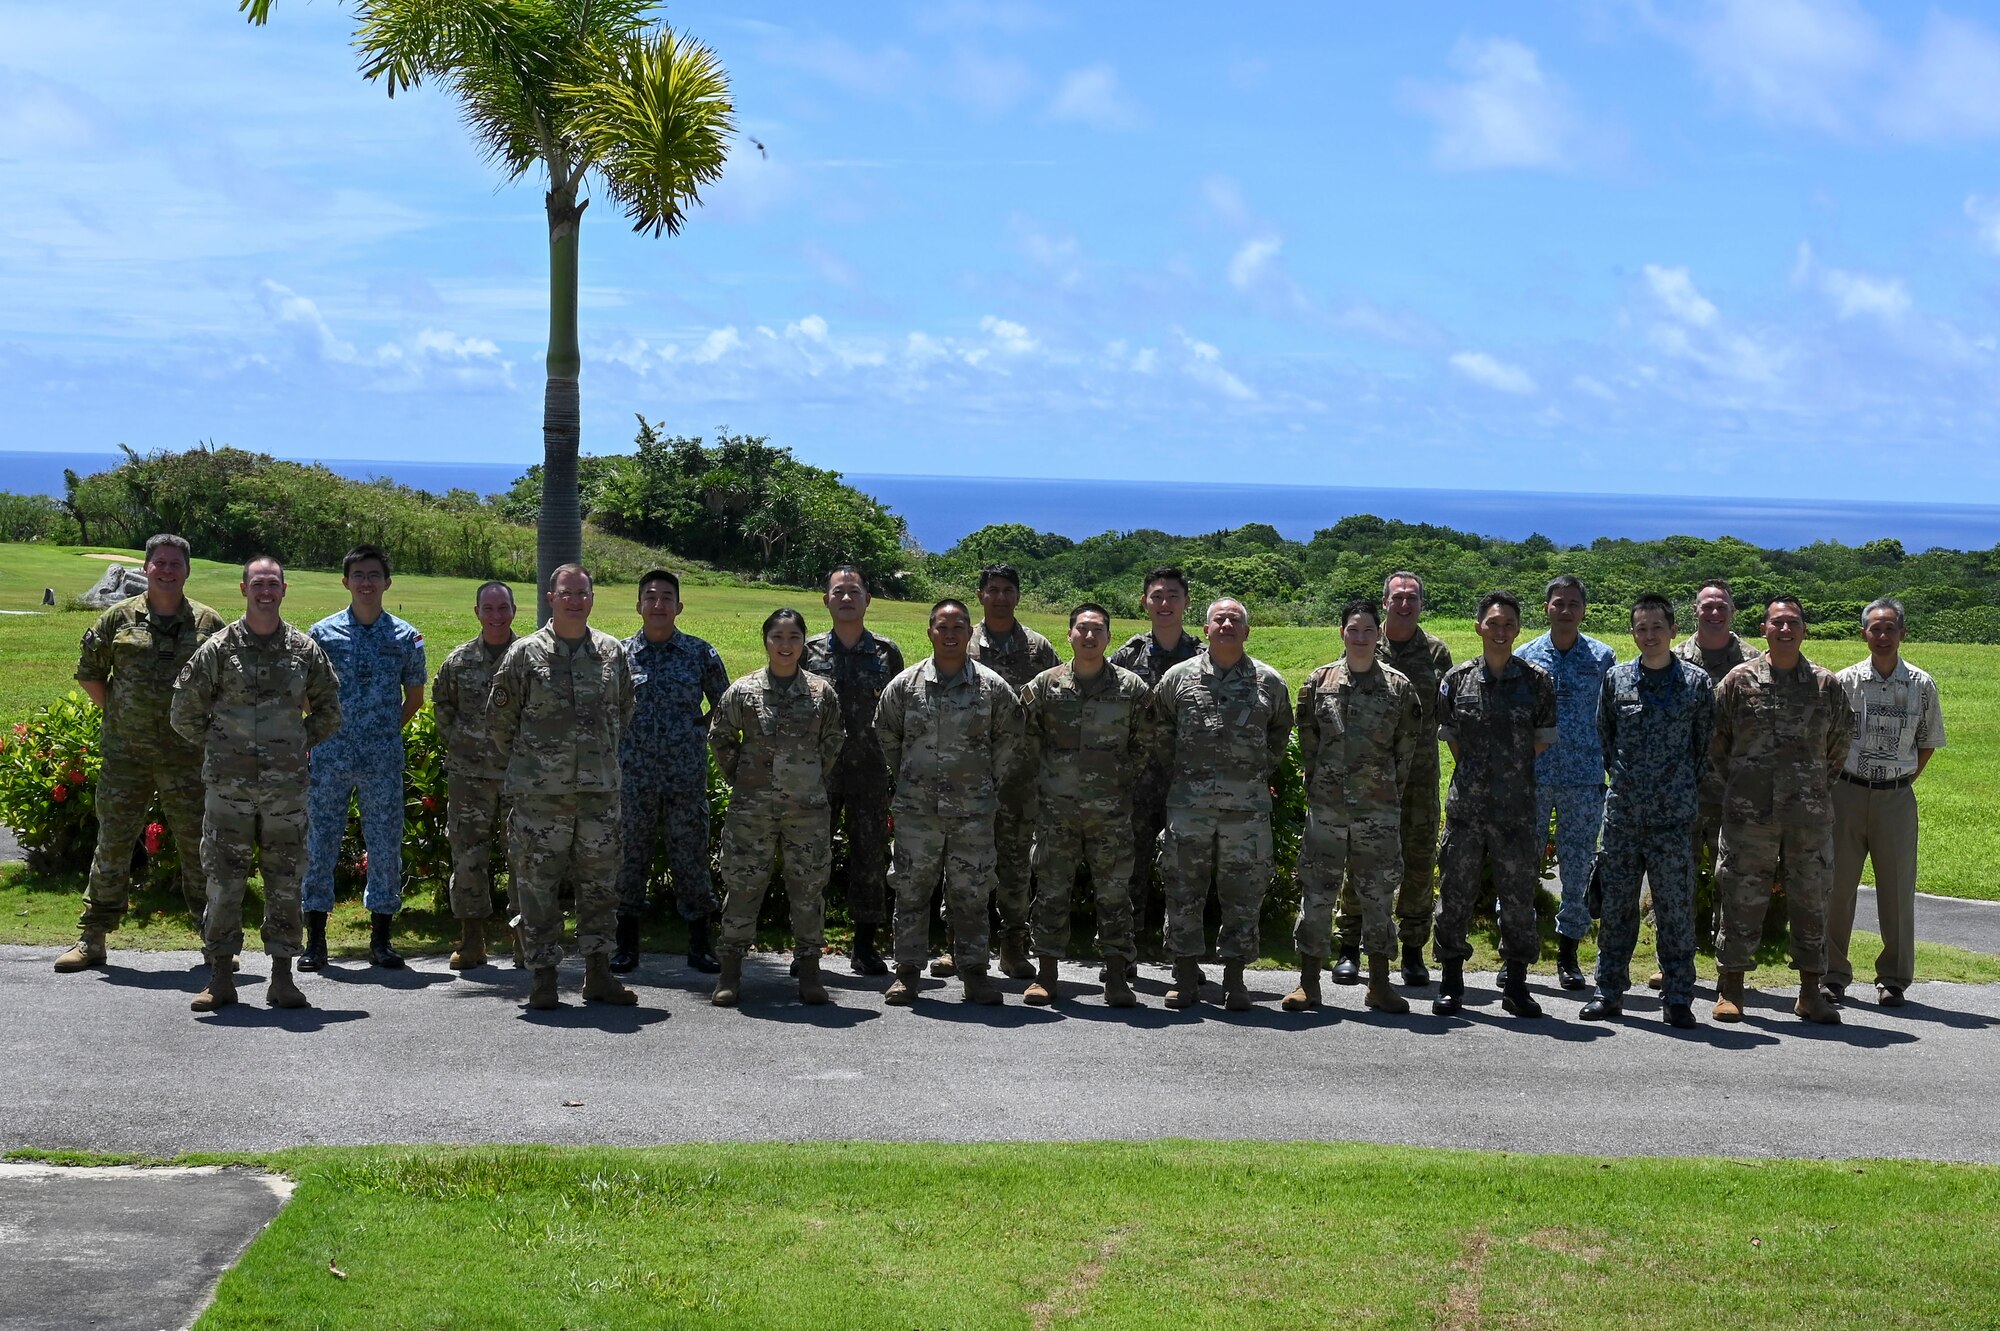 Members of the U.S. Air Force, Royal Australian Air Force, Japan Air Self-Defense Force, Republic of Korea Air Force and the Republic of Singapore Air Force pose for a photo during the Pacific Unity Multi-Lateral Civil Engineer Key Leader Engagement, June 22, 2022 at Andersen Air Force Base, Guam. Senior military leaders from six Indo-Pacific nations gathered for the KLE to focus on multi-lateral efforts accelerating interoperability among their respective engineers. (U.S. Air Force Photo by Airman 1st Class Emily Saxton)